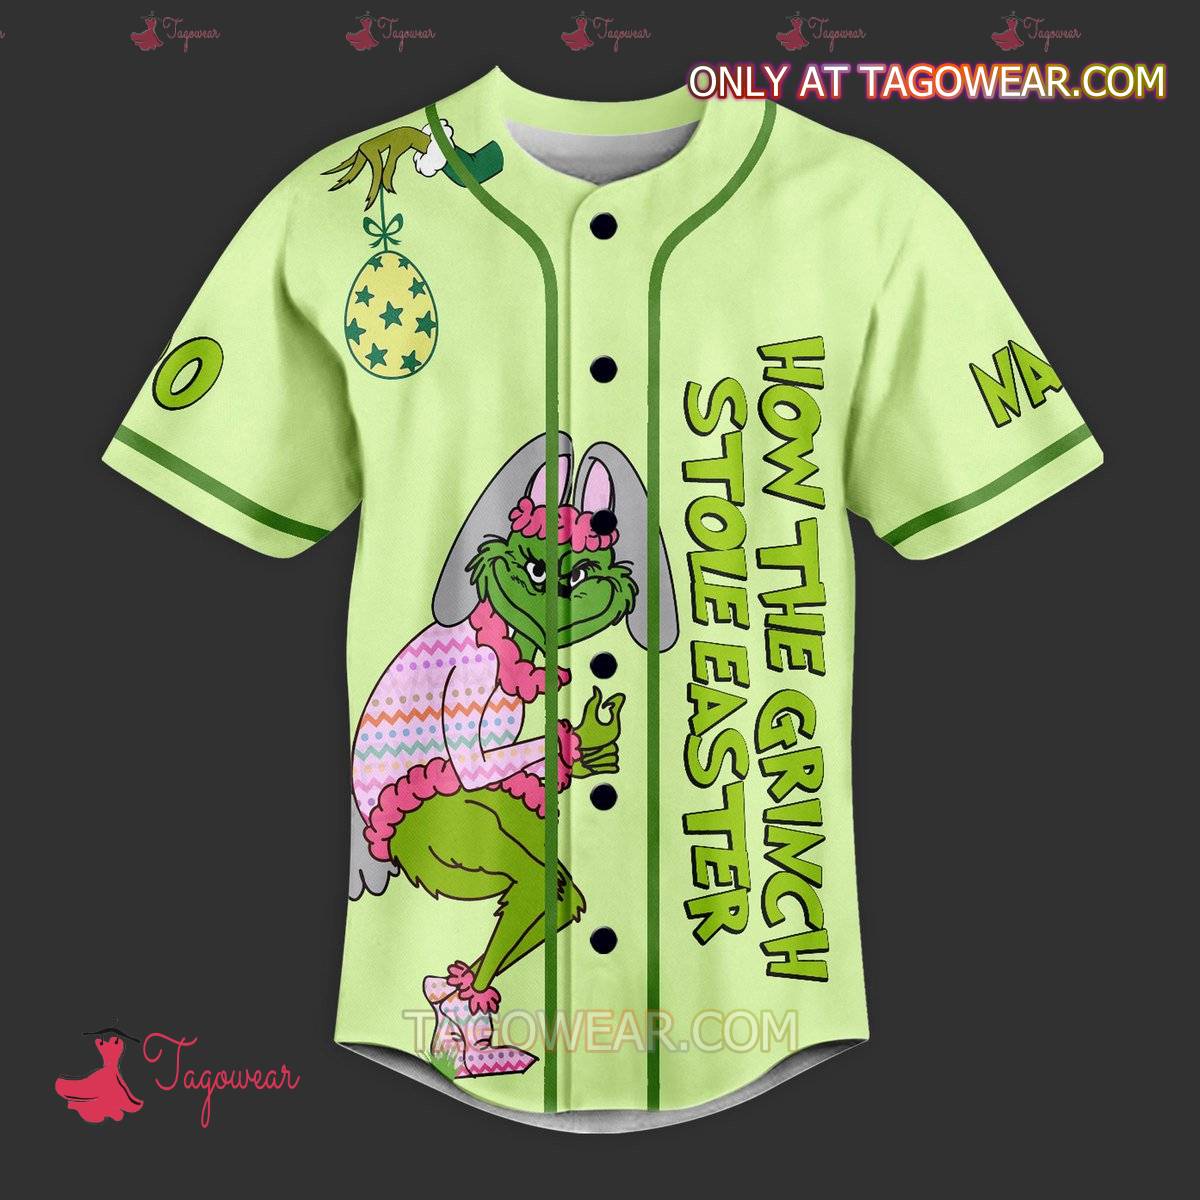 How The Grinch Stole Easter Personalized Baseball Jersey a